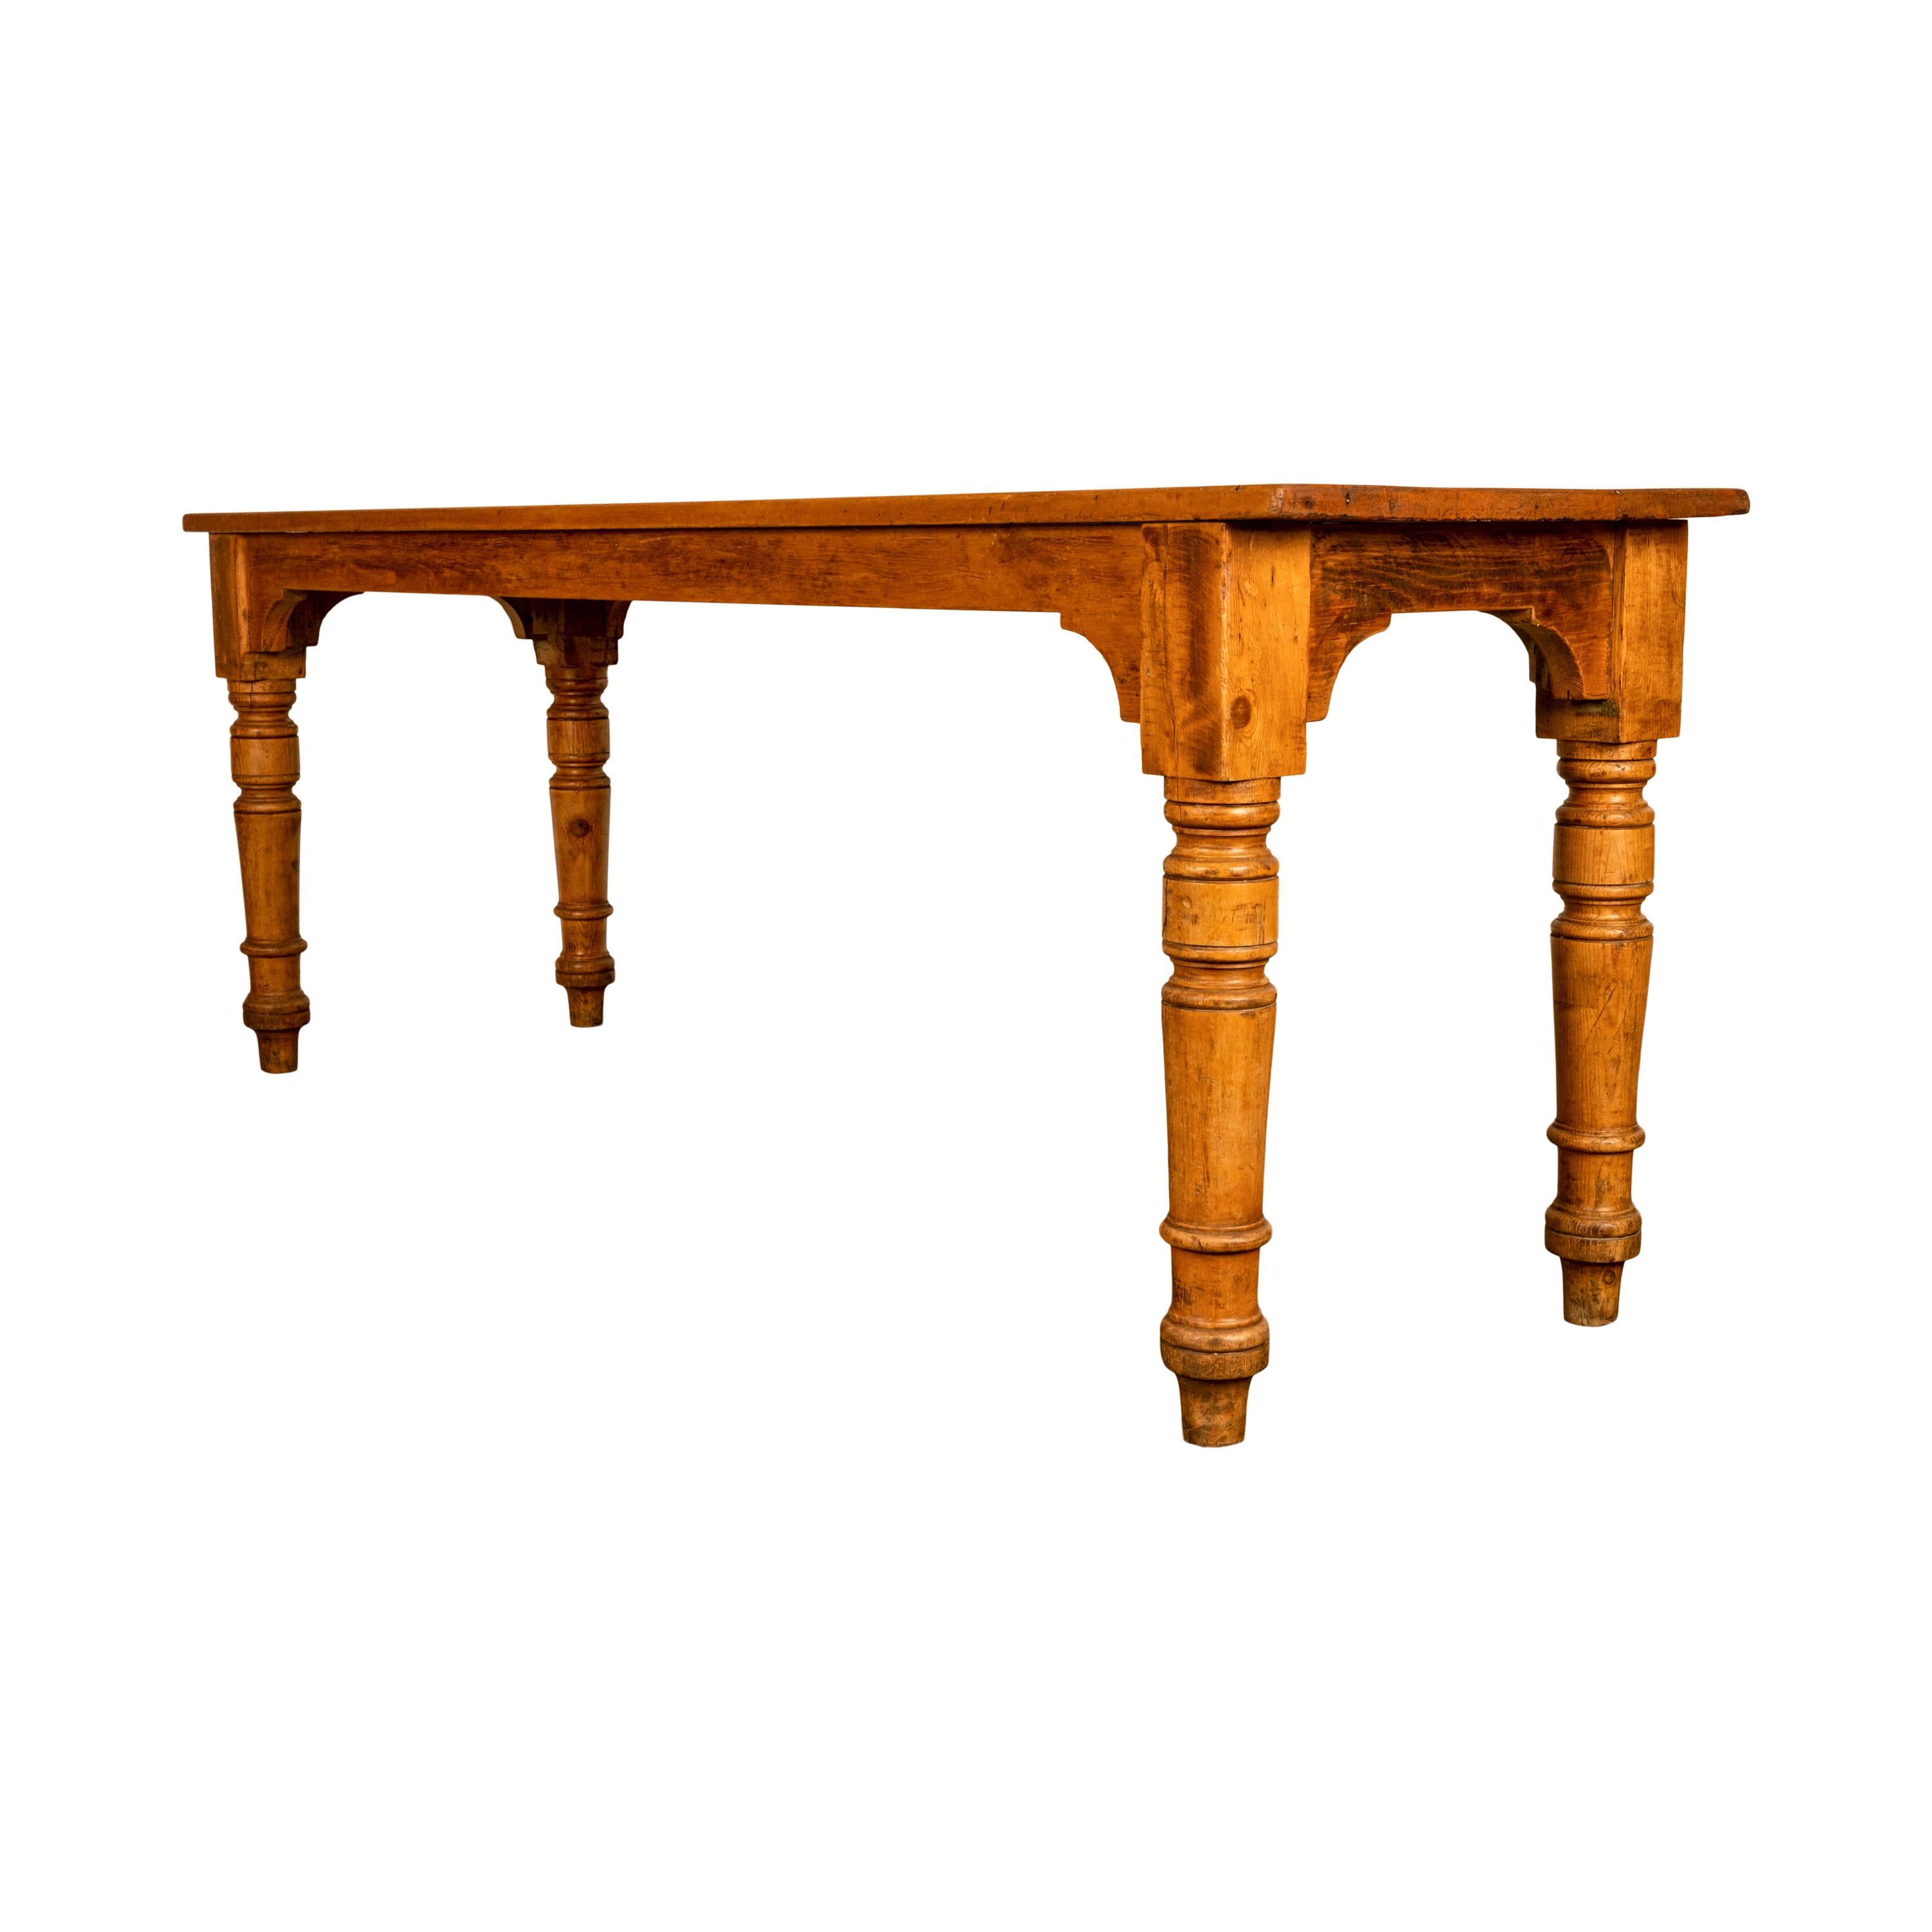 Antique 19th Century English Pine Country Farmhouse 8 seat Dining Table 1860 For Sale 1